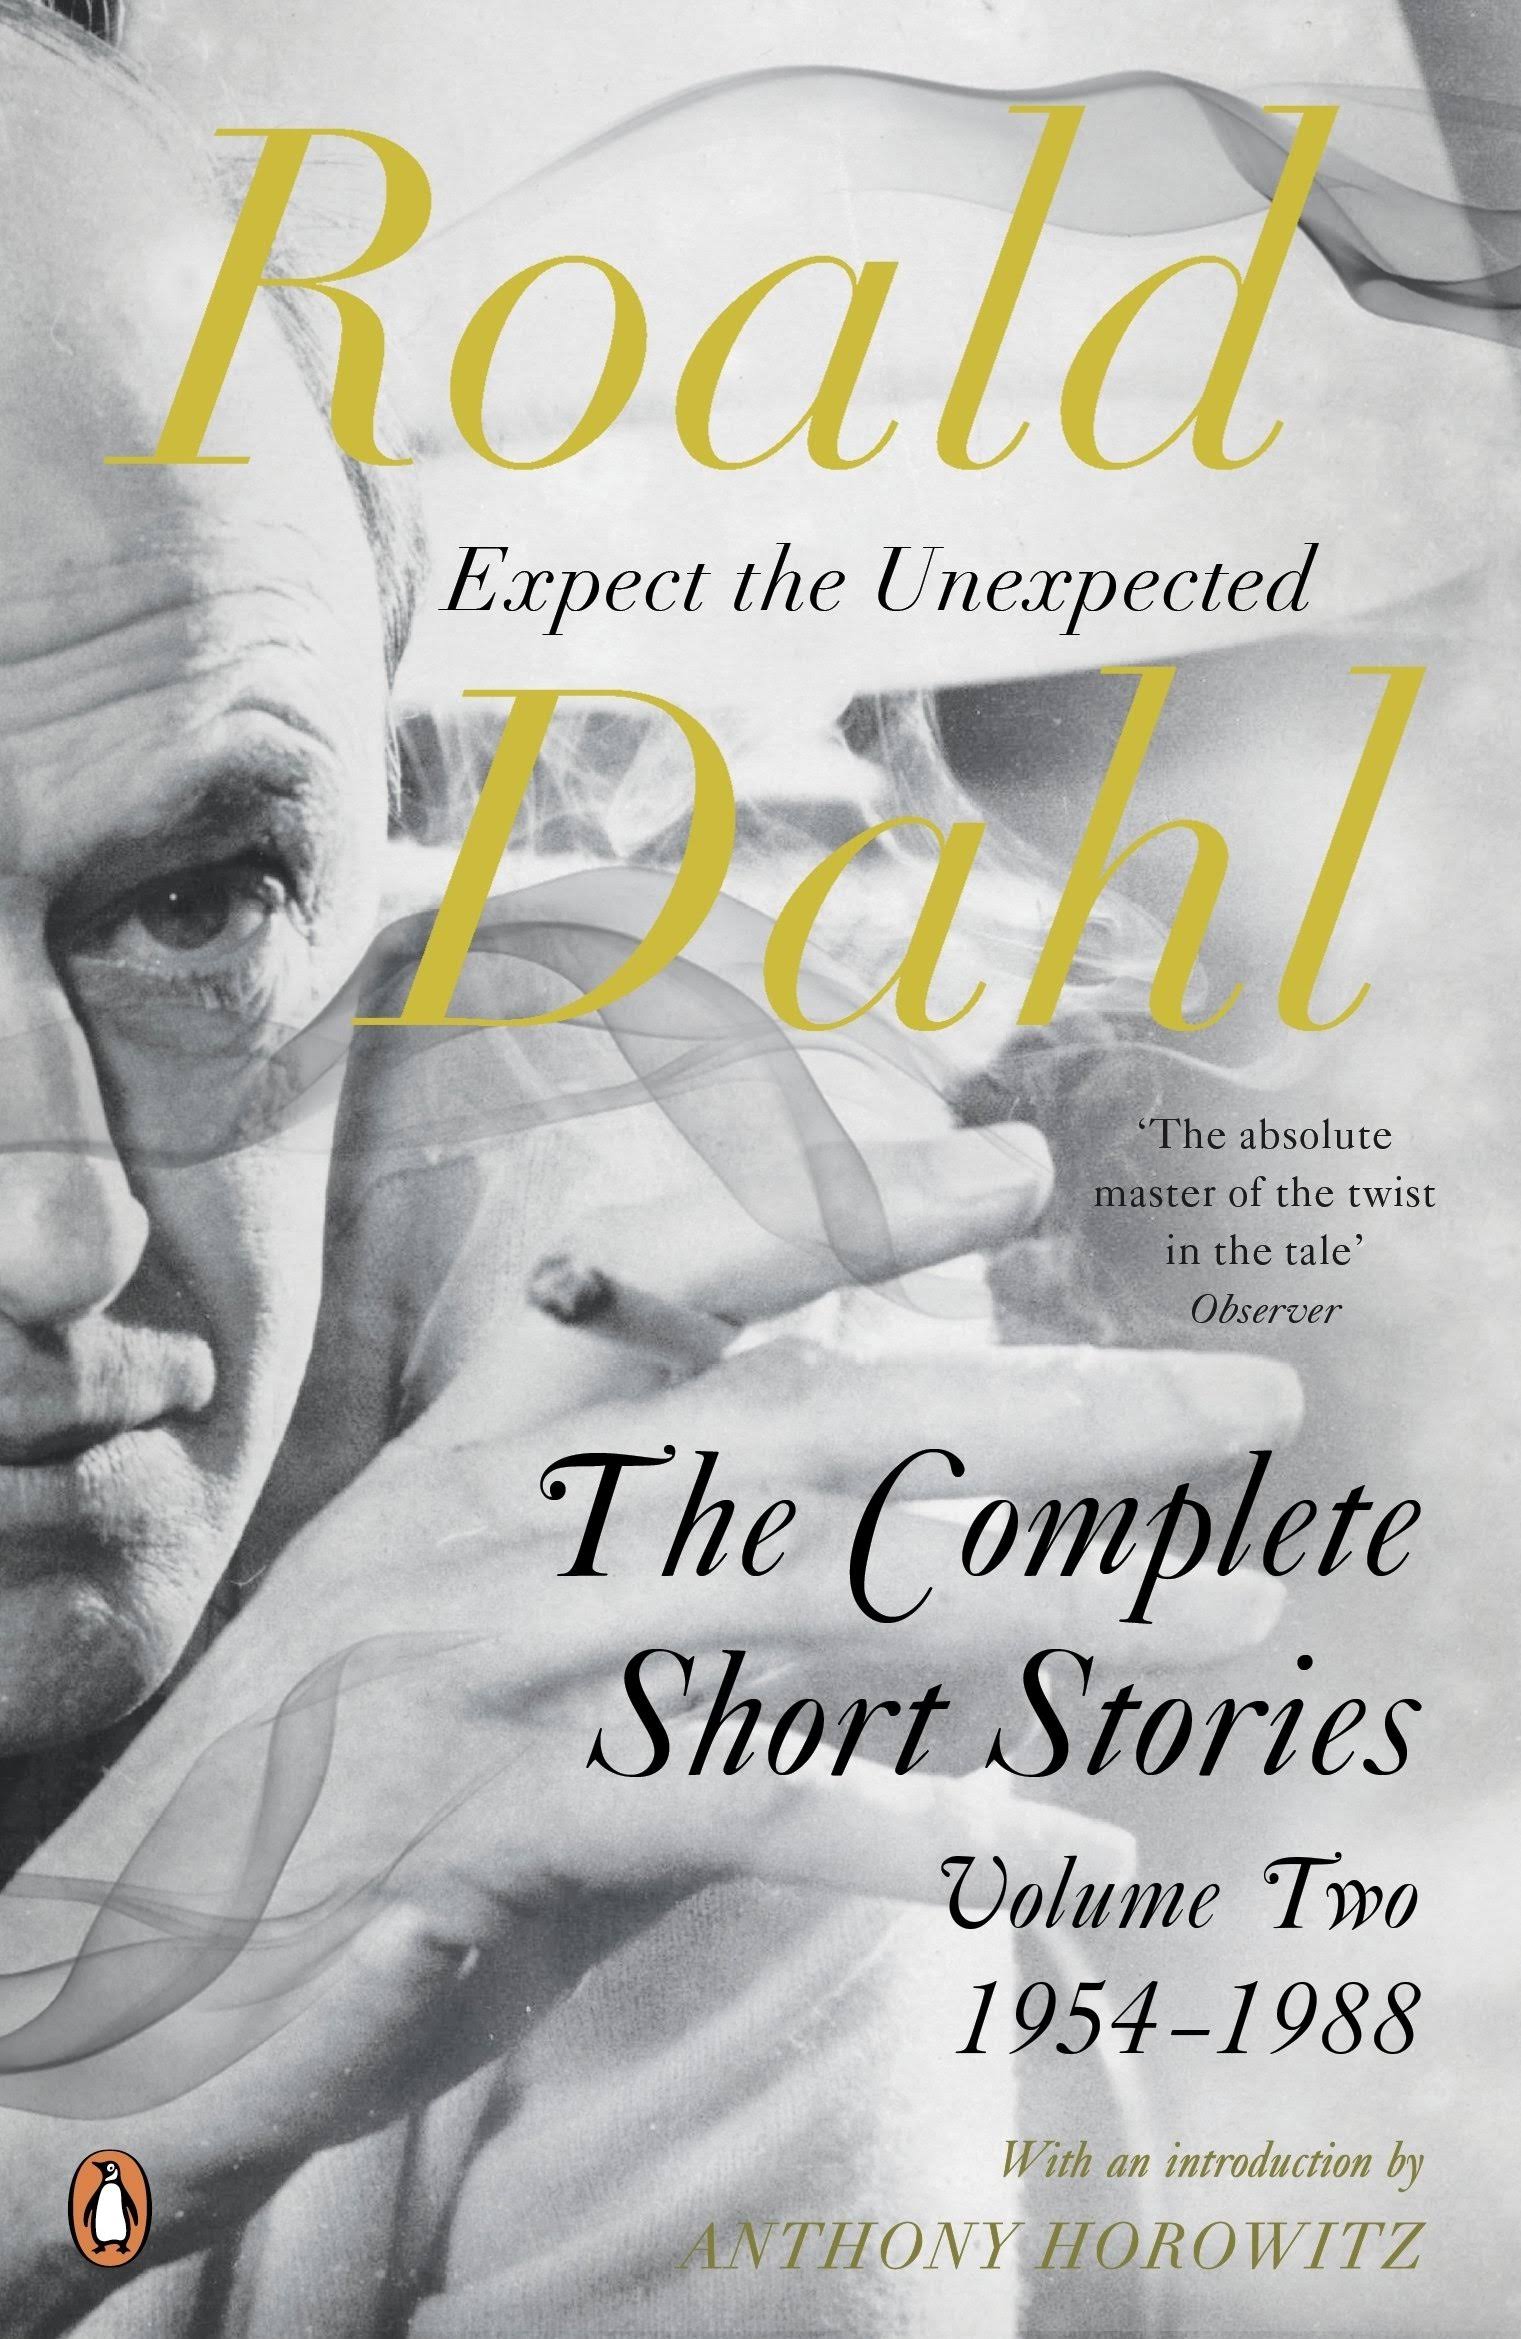 The Complete Short Stories: Volume Two by Dahl Roald